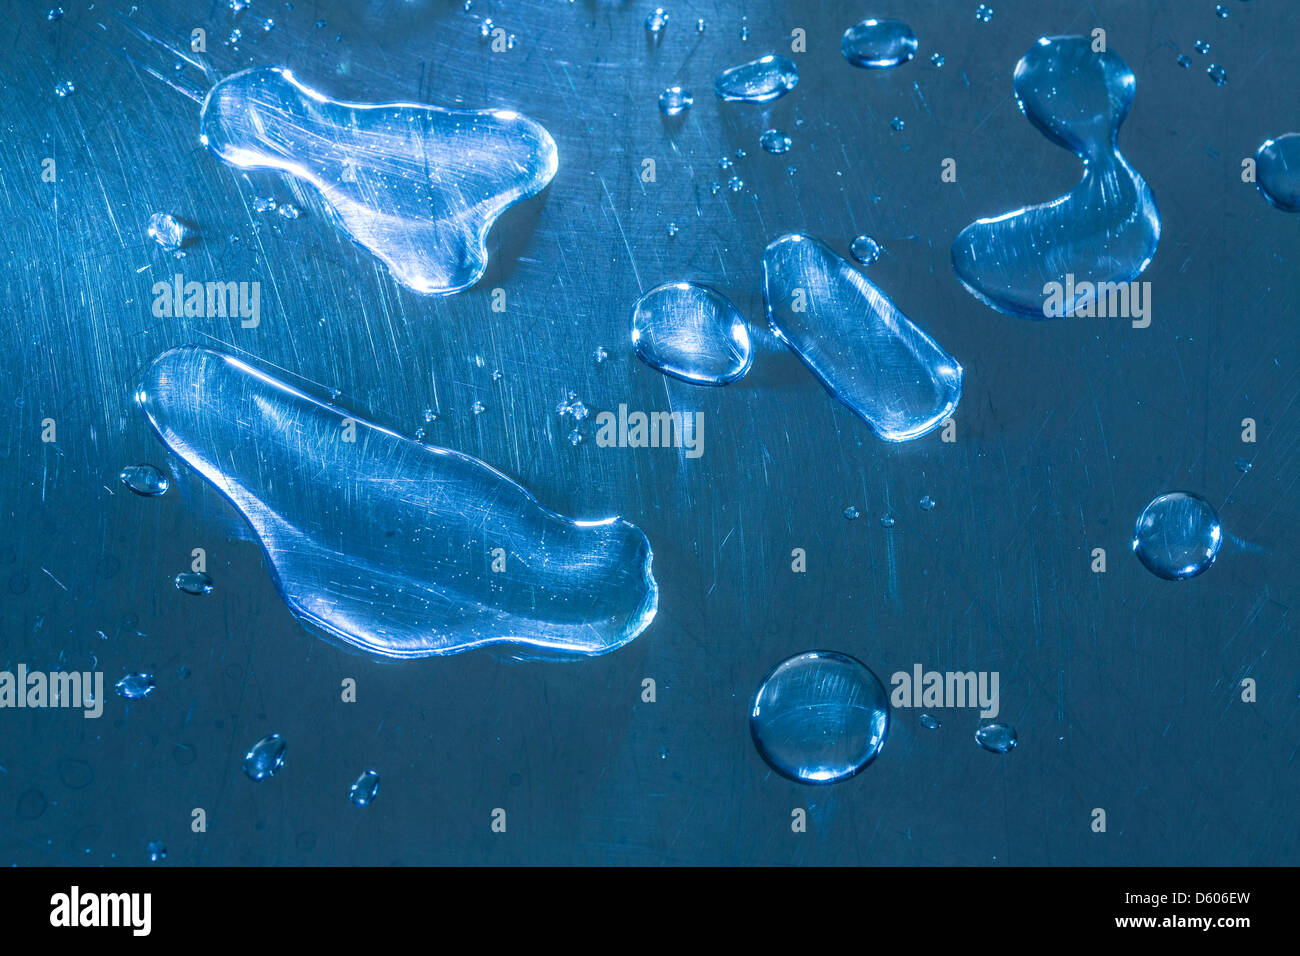 Water drops on a metal surface. Stock Photo